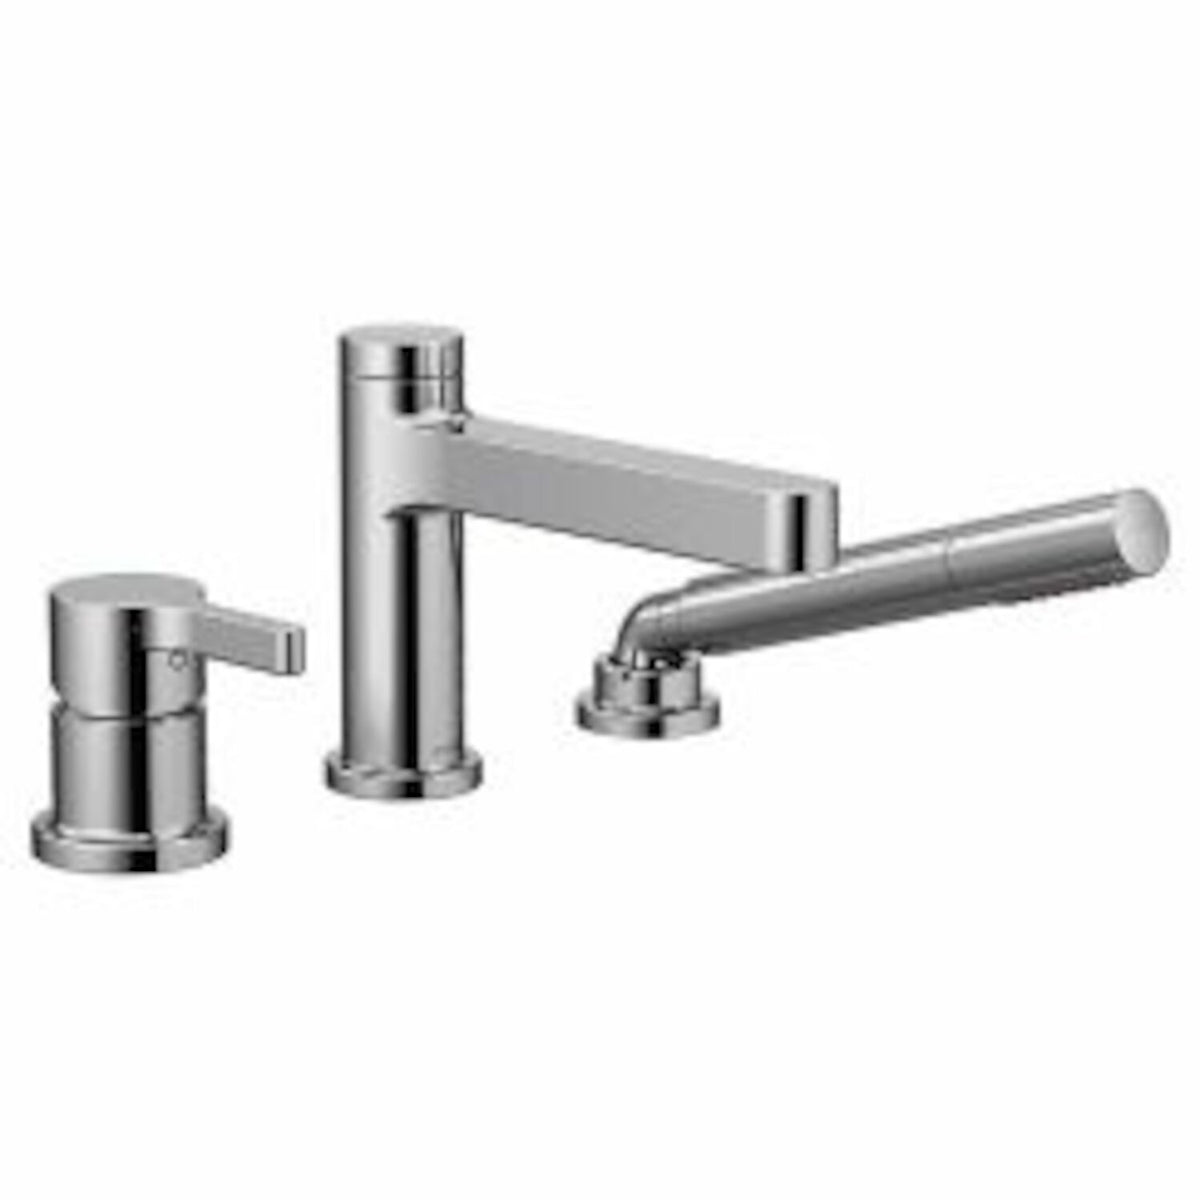 VICHY ONE-HANDLE LOW ARC ROMAN TUB FAUCET INCLUDES HAND SHOWER